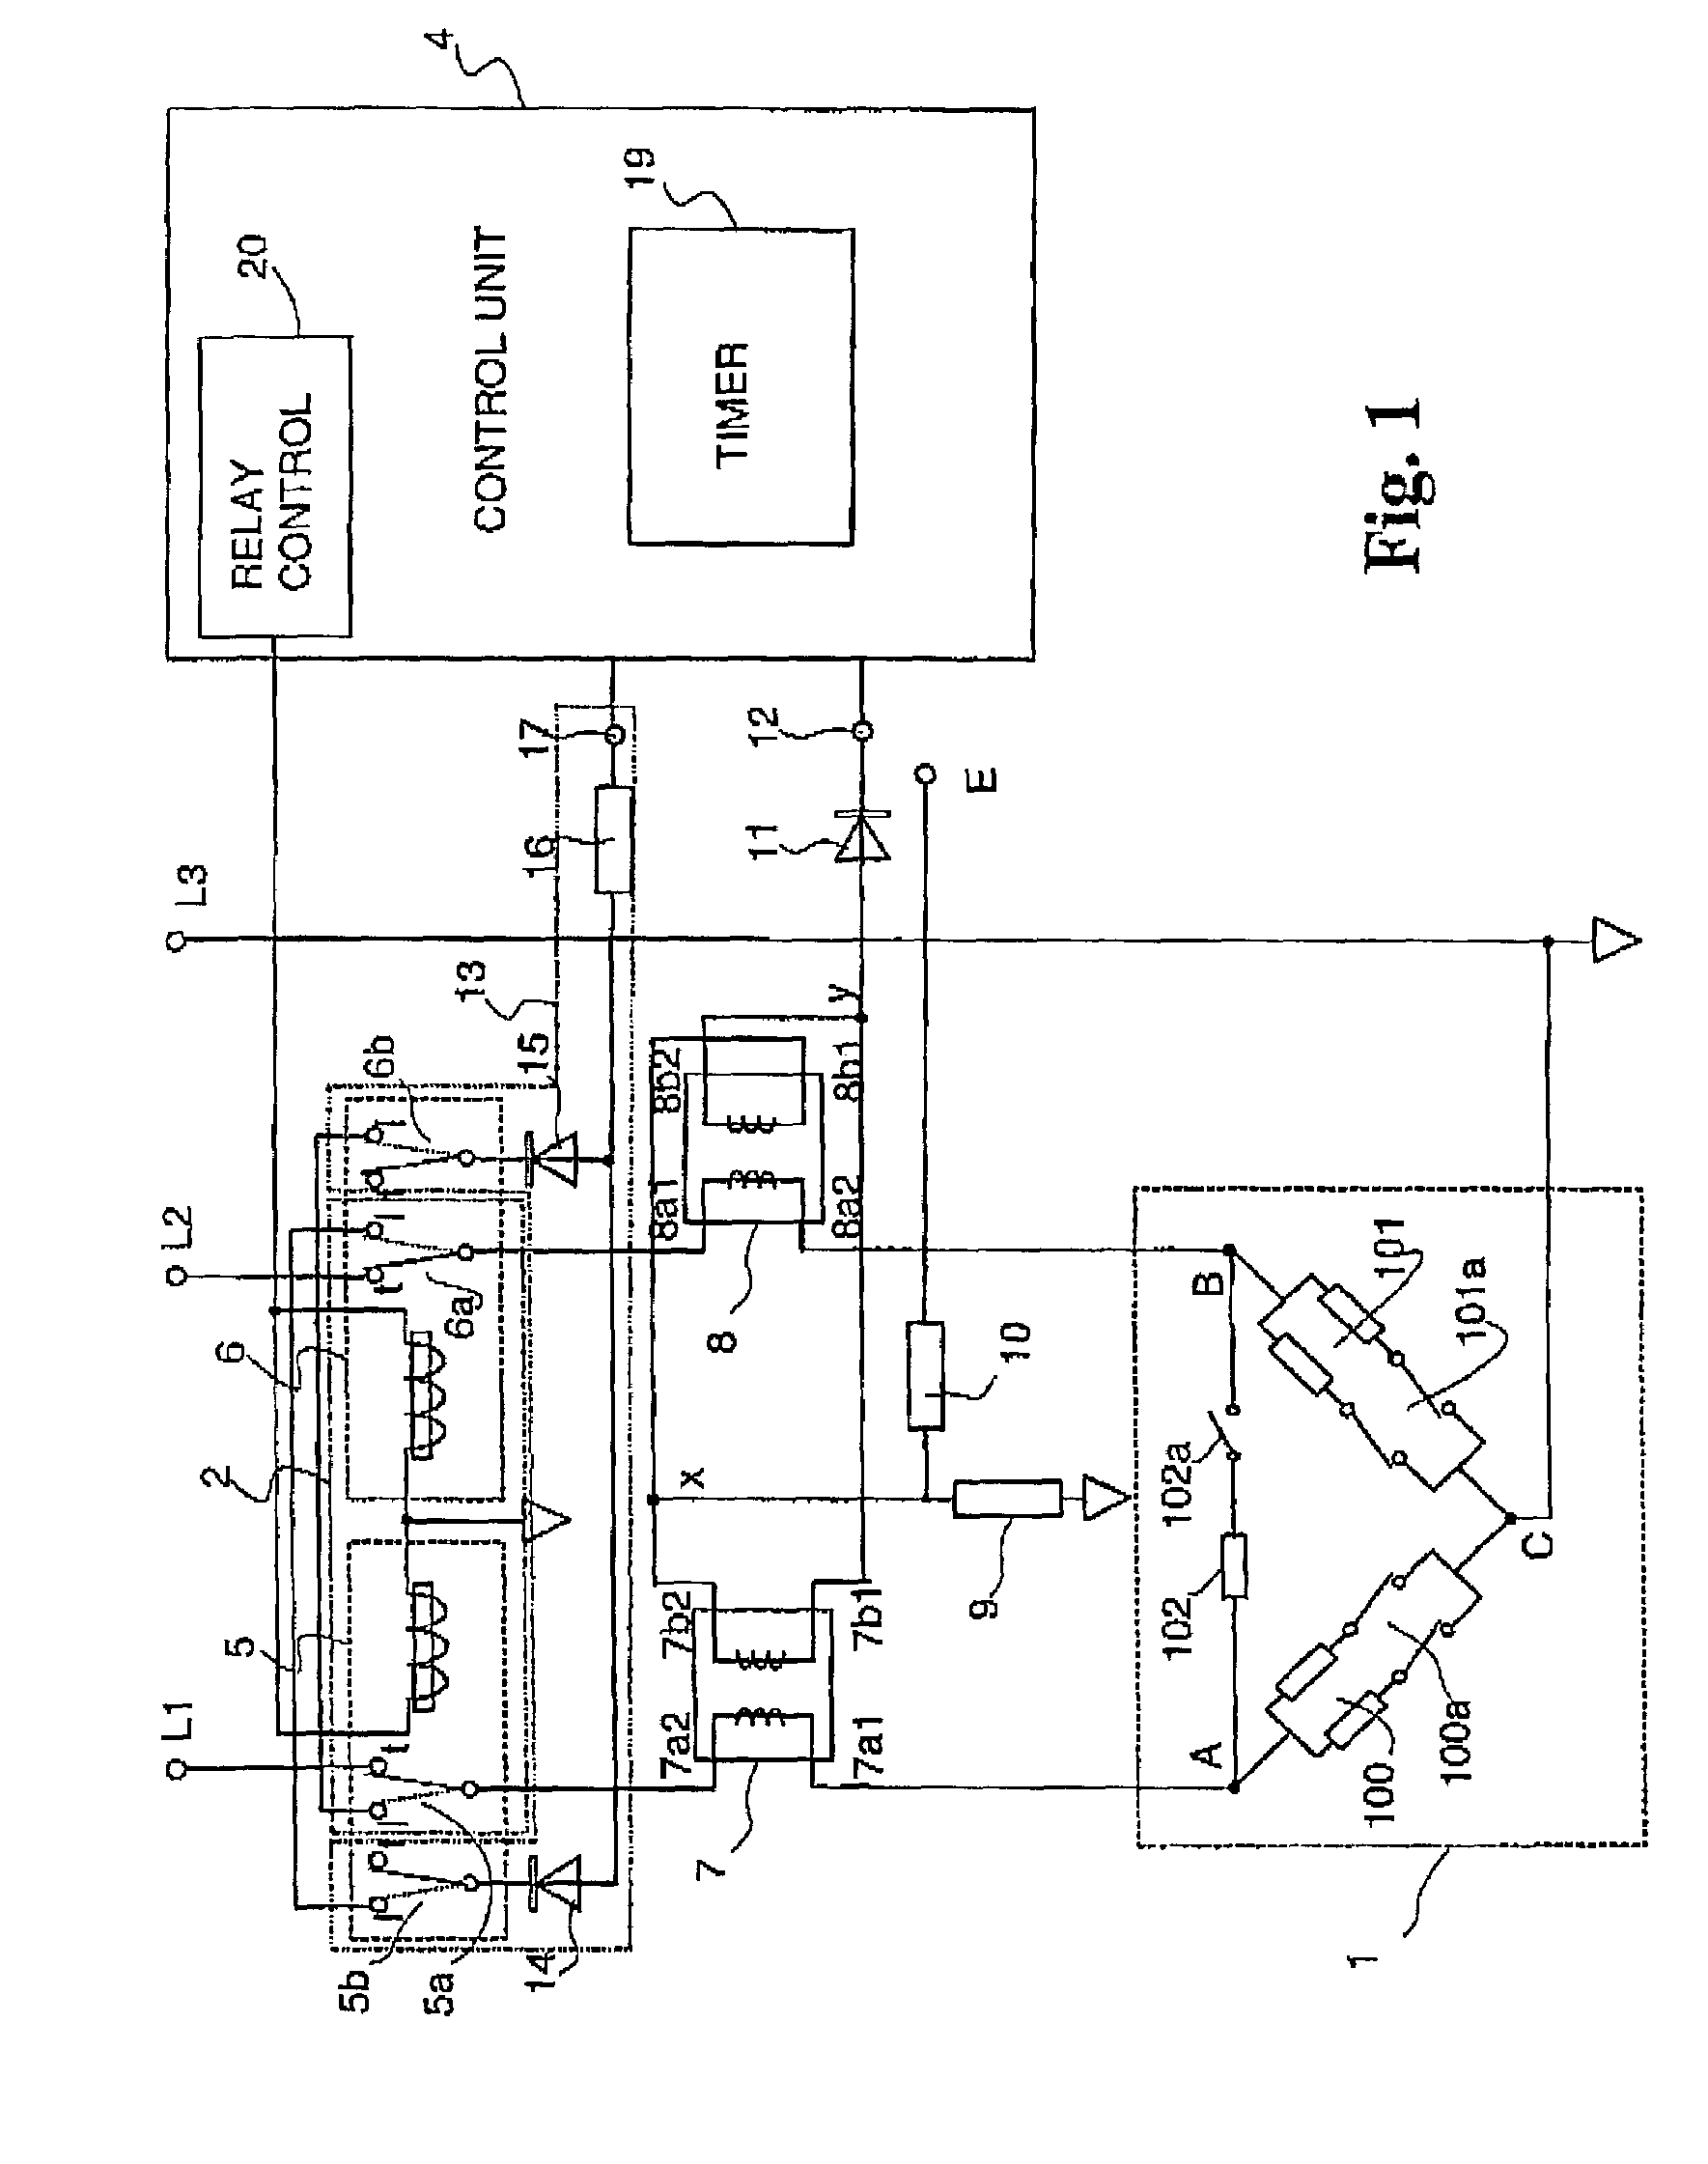 Safety device for a delta-connected three-phase electric appliance